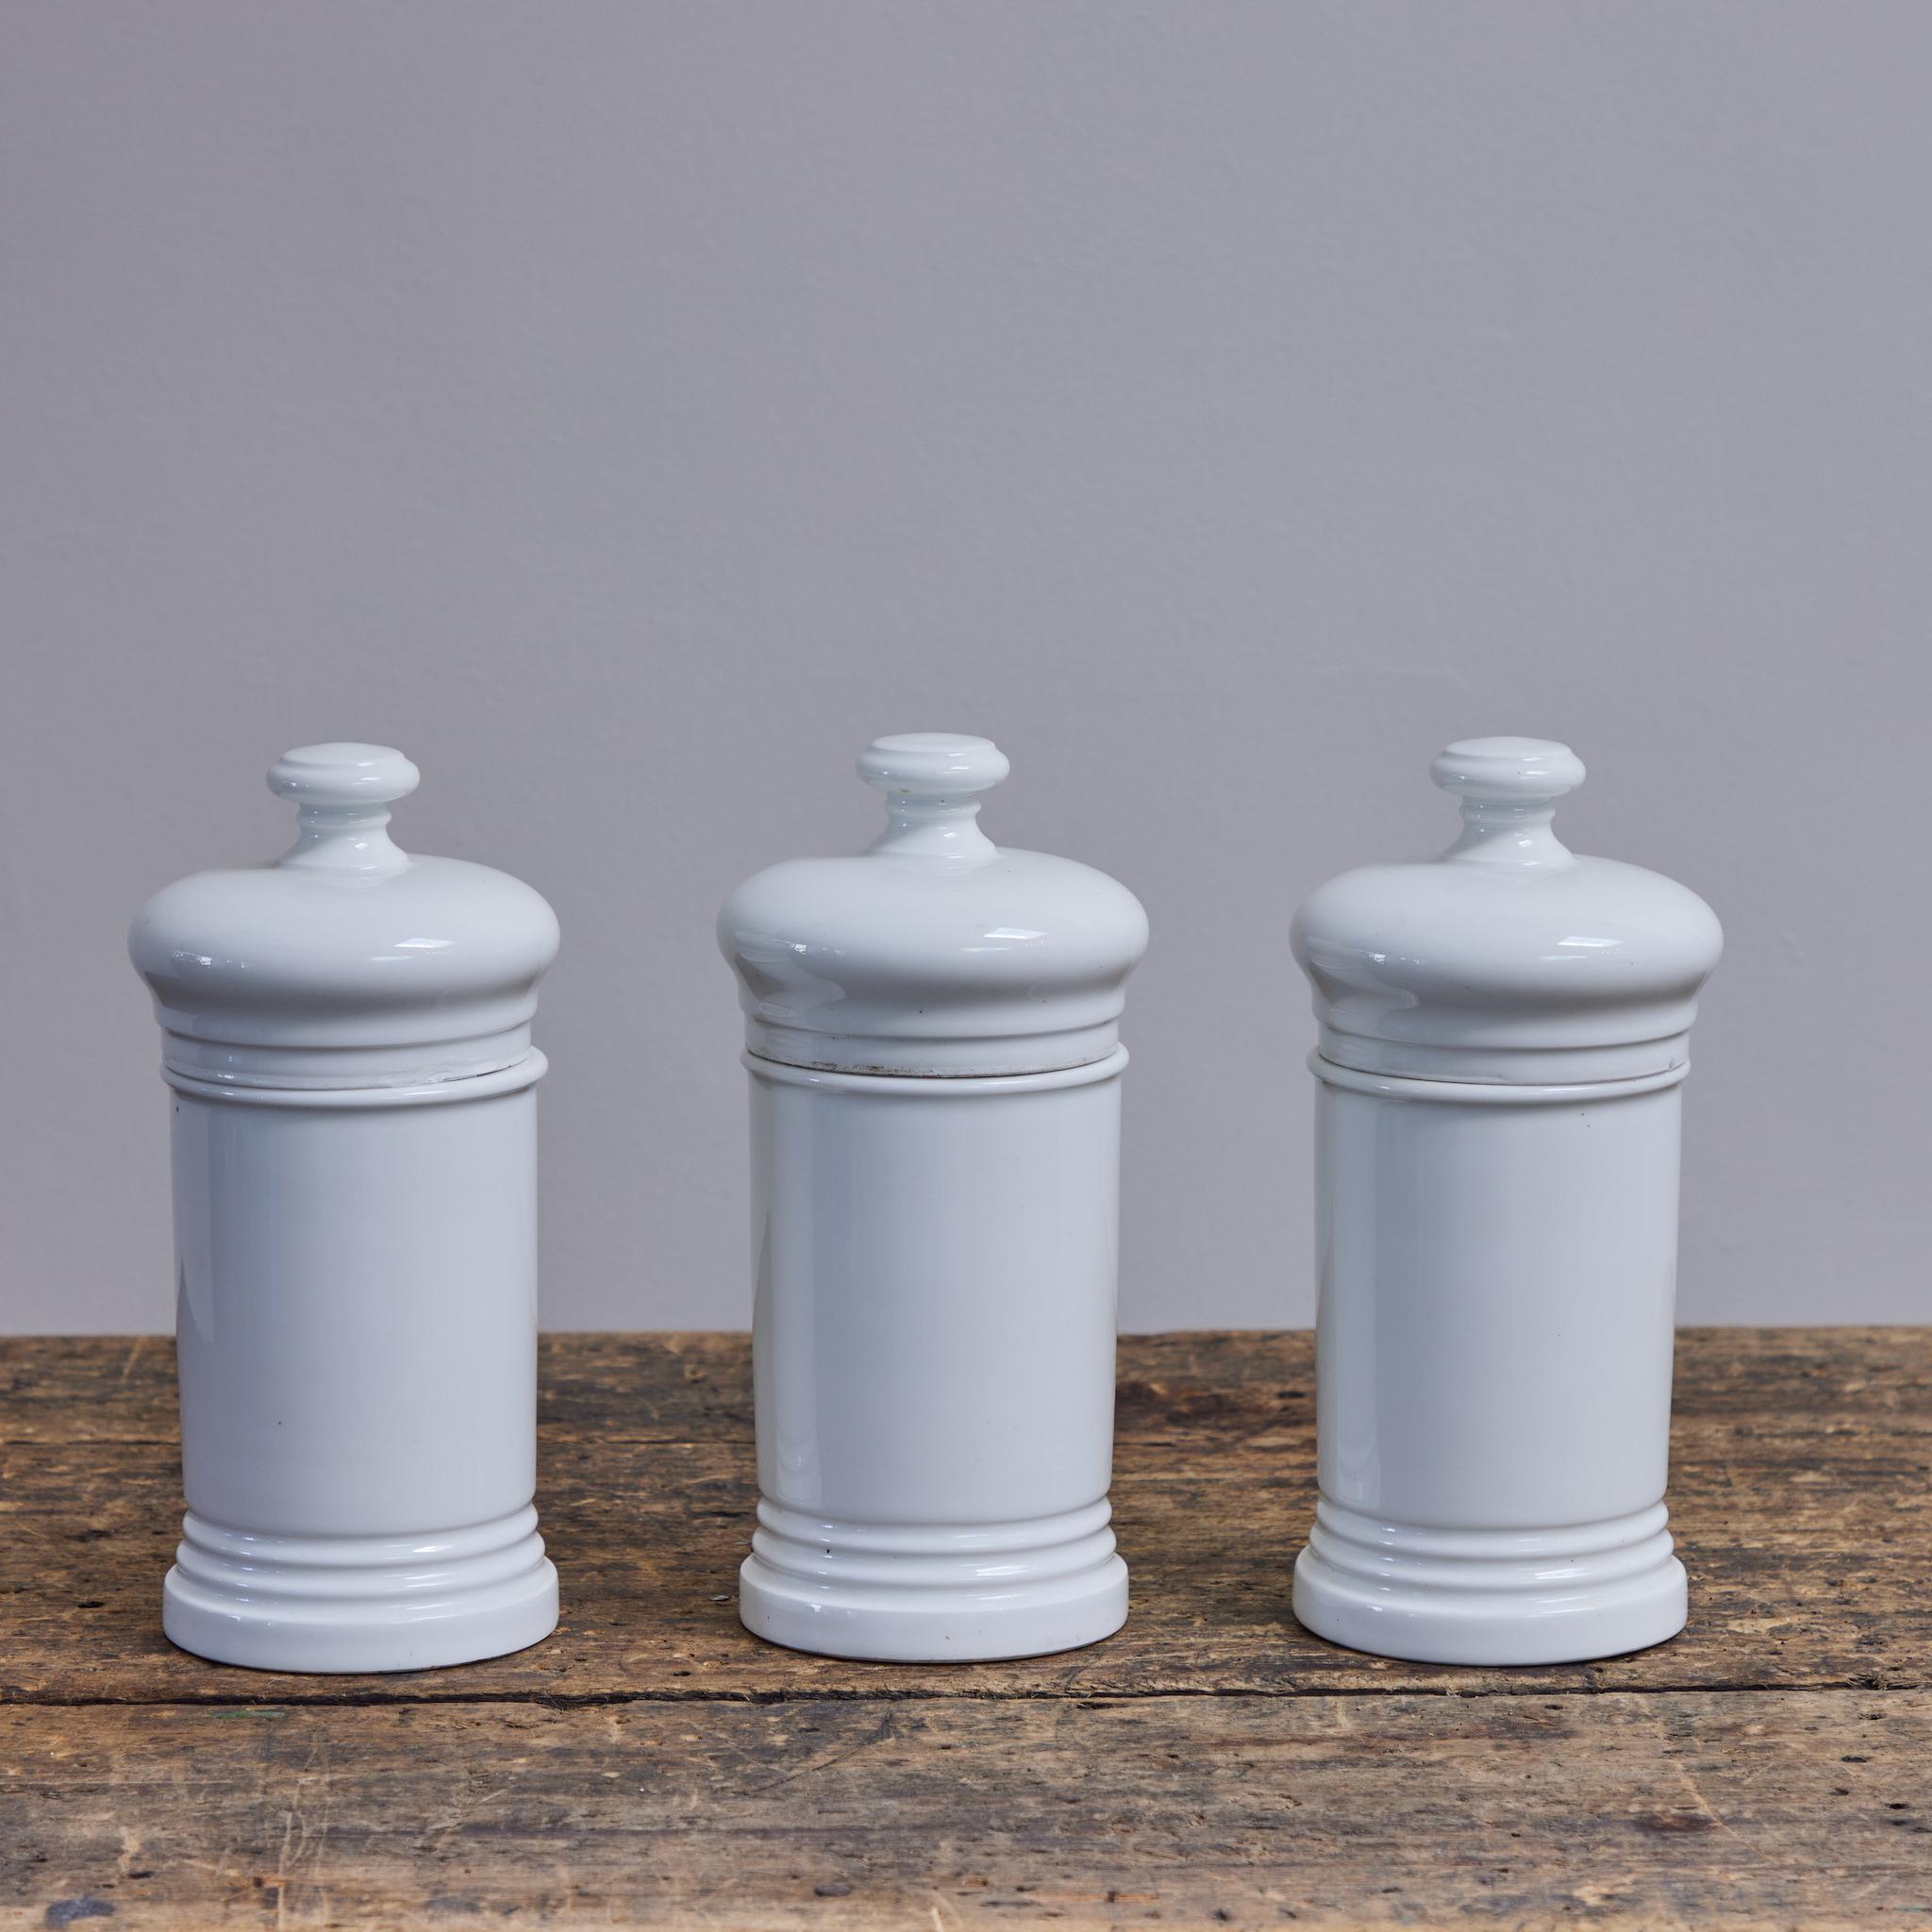 Cream white porcelain apothecary jar, hailing from late 19th-century Spain.  At once rustic and refined, the piece is highly versatile, and would make for especially excellent storage in a kitchen or bathroom setting. Once used for herb dispensary,